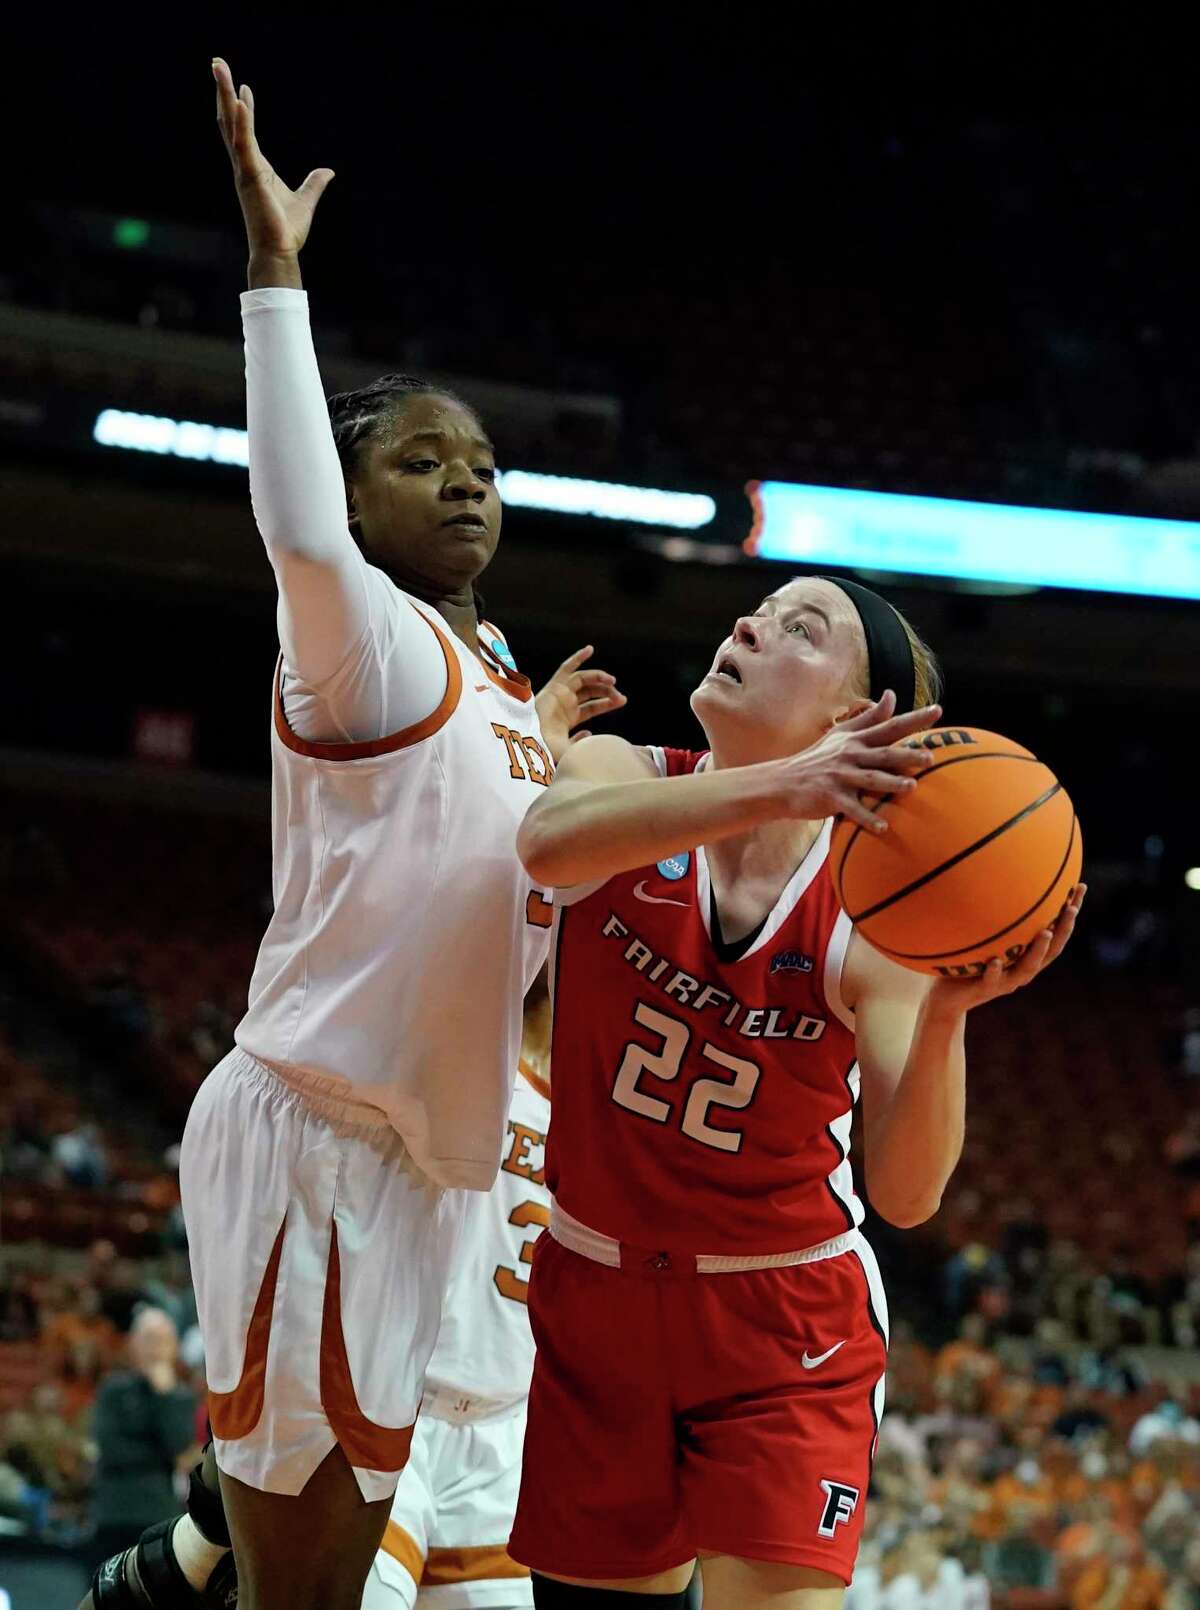 Fairfield guard Rachel Hakes (22) drives to the basket against Texas forward DeYona Gaston, left, during the first half of a college basketball game in the first round of the NCAA women's tournament Friday, March 18, 2022, in Austin, Texas. (AP Photo/Eric Gay)